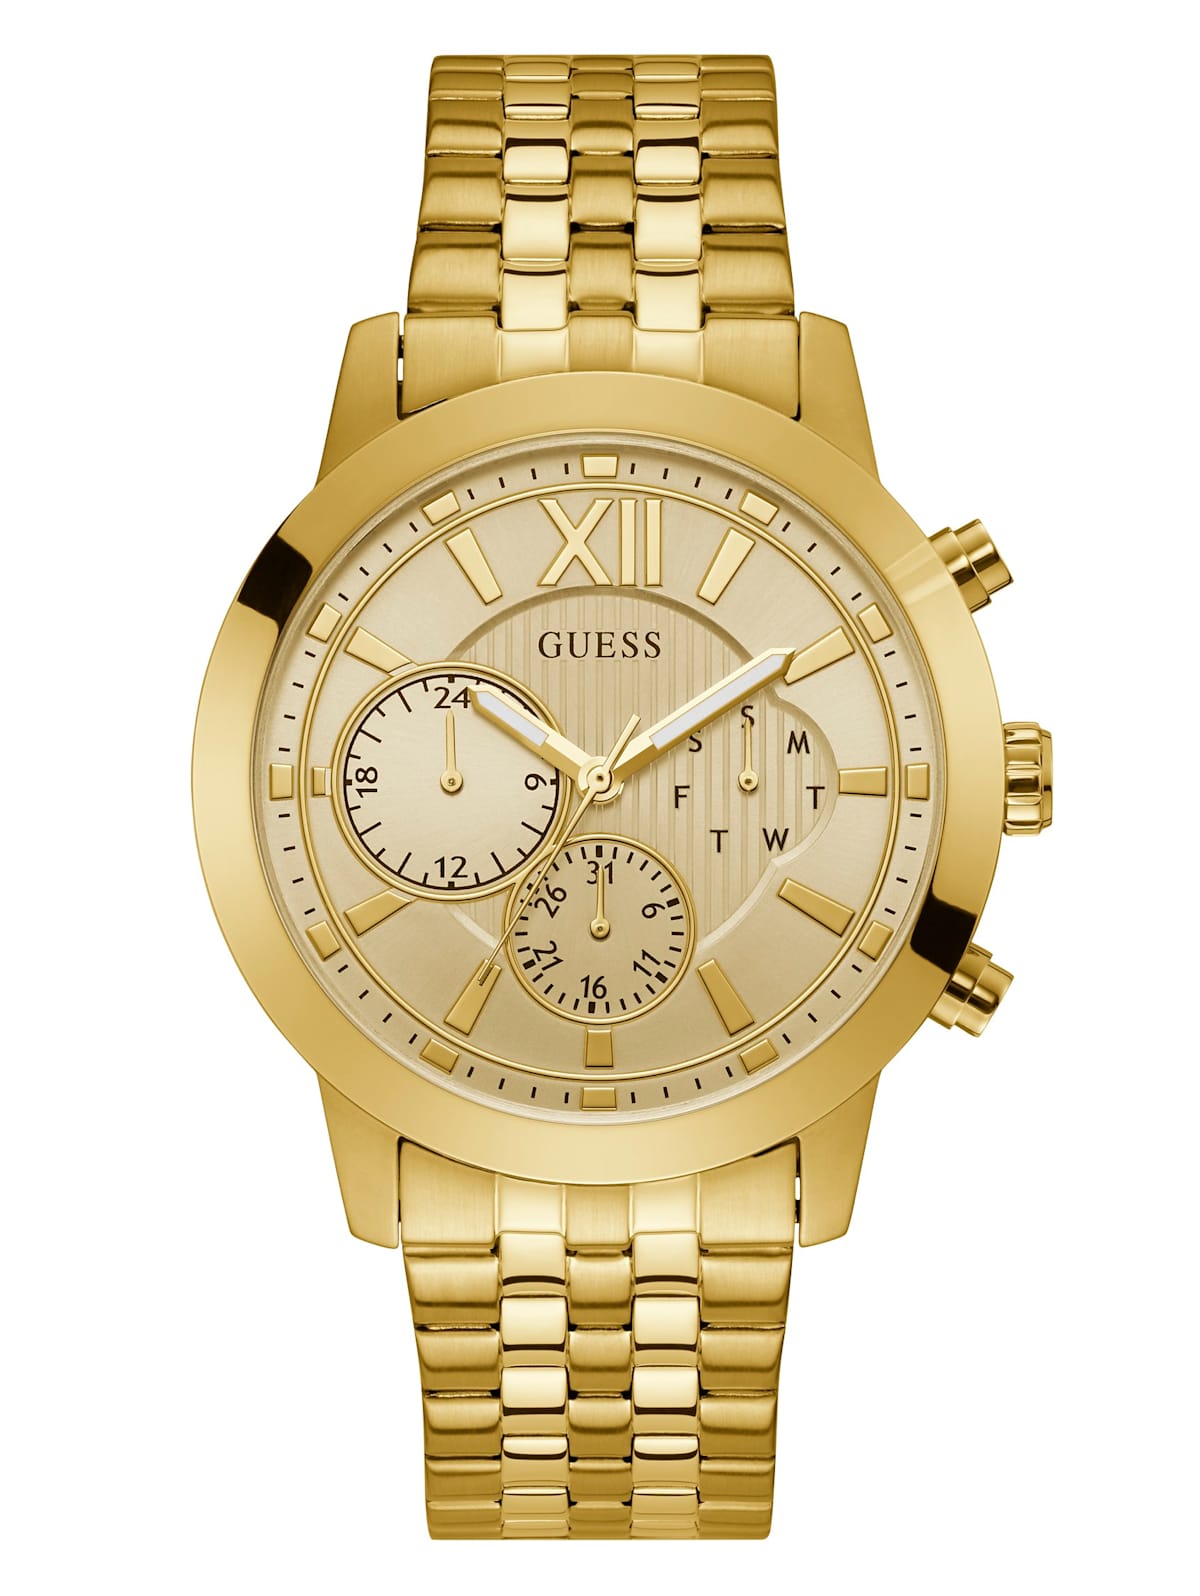 Chrono-Look Multifunction Watch | GUESS